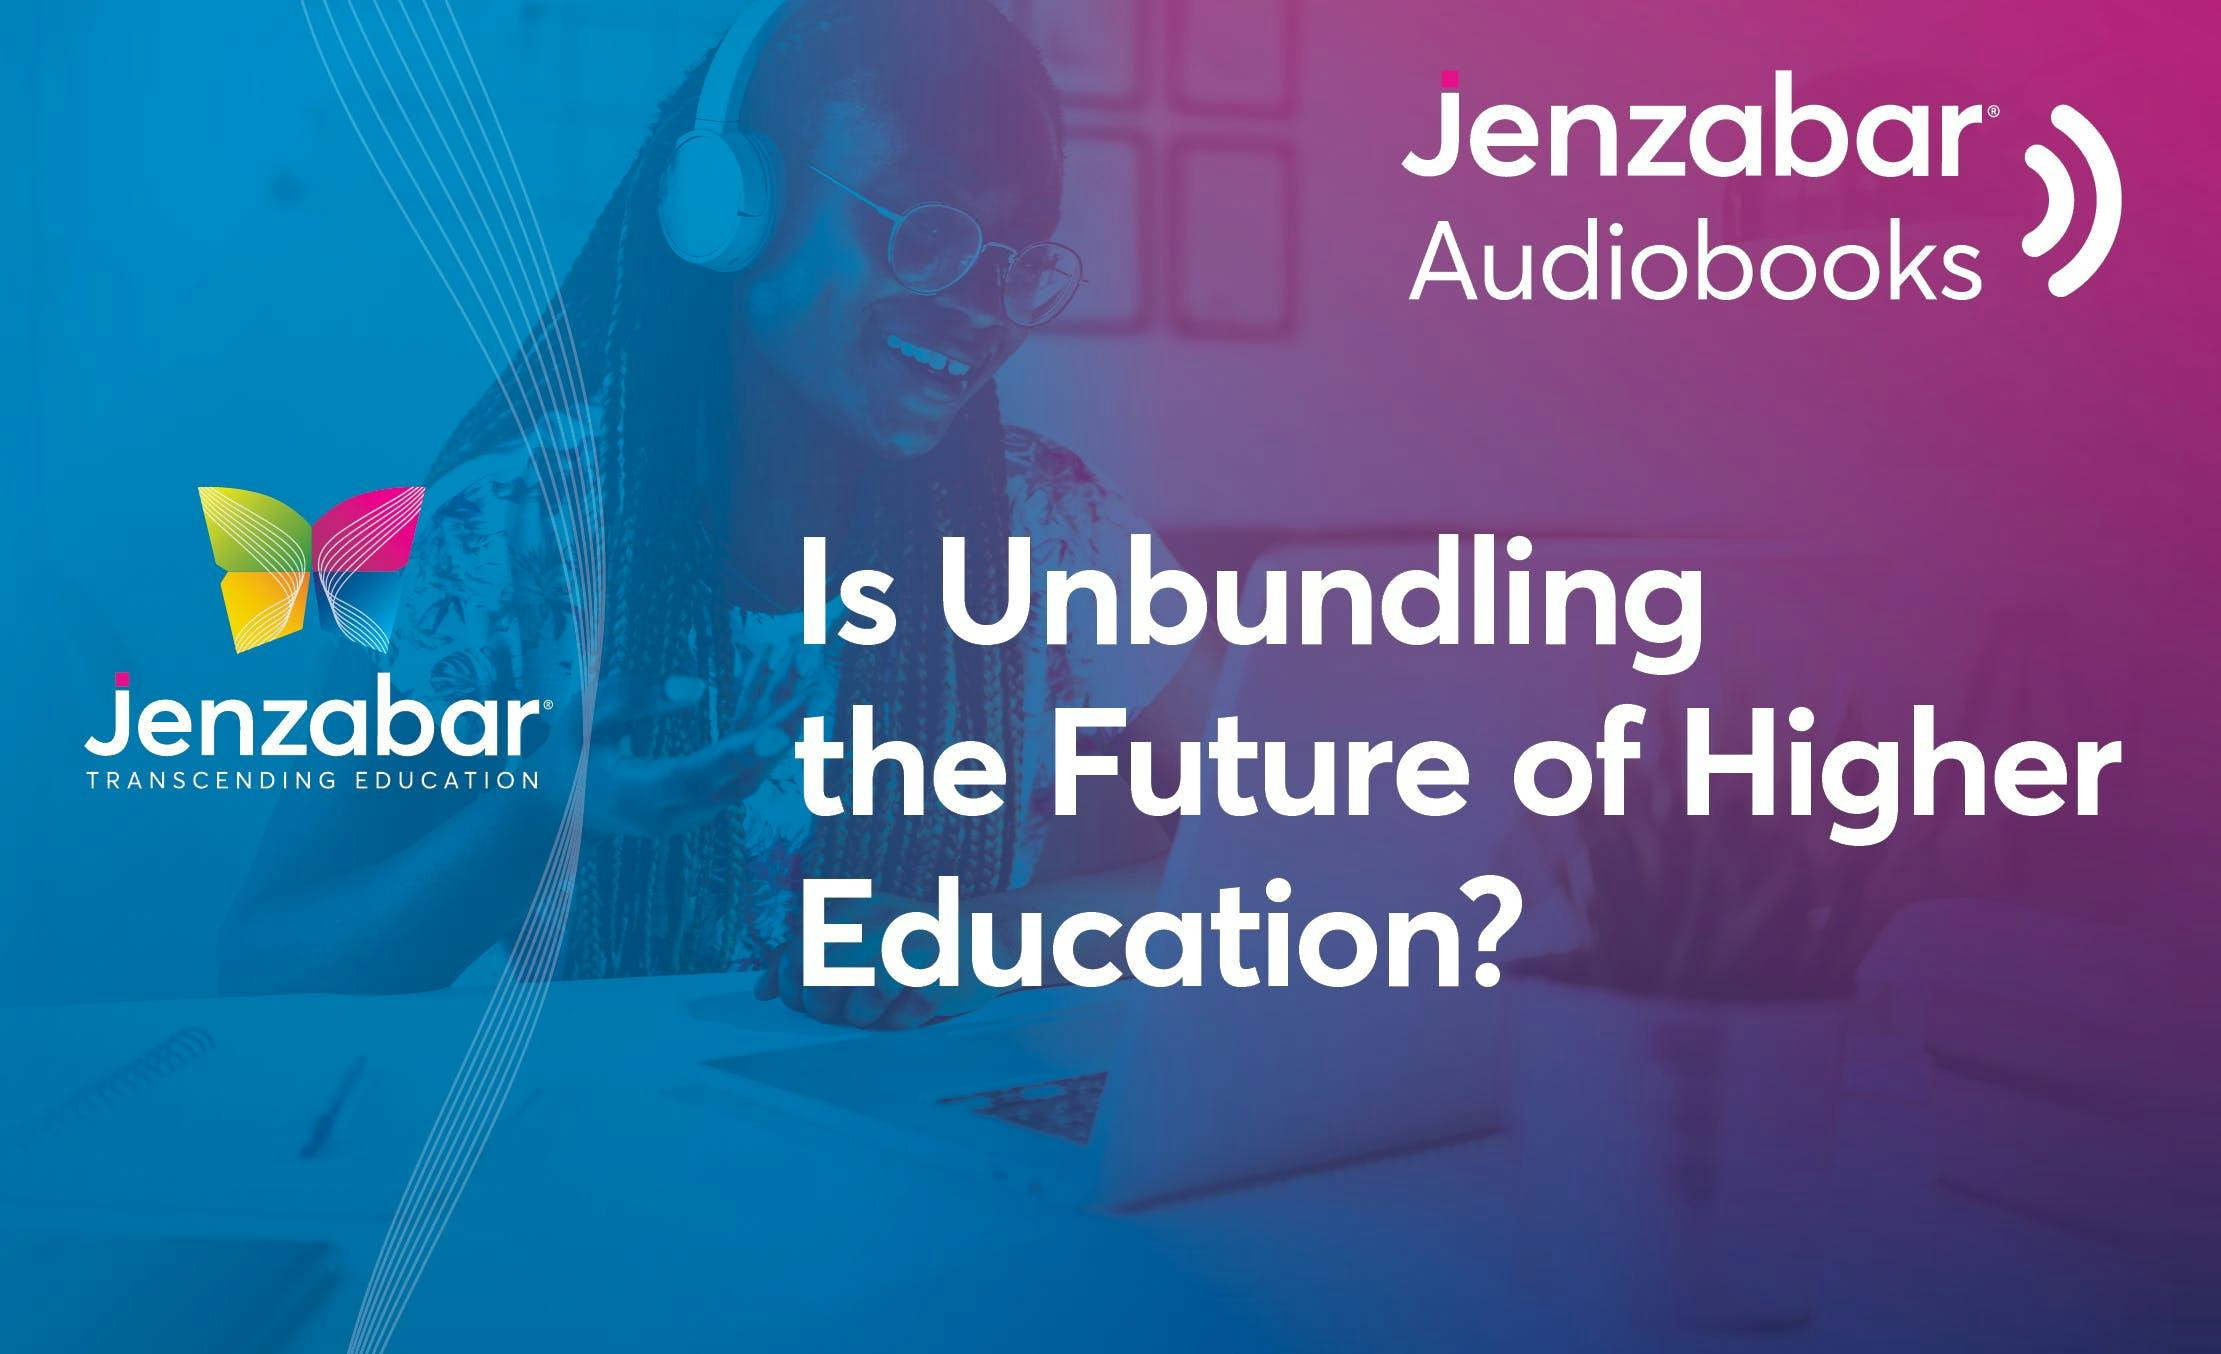 Audiobook: Is Unbundling the Future of Higher Education?